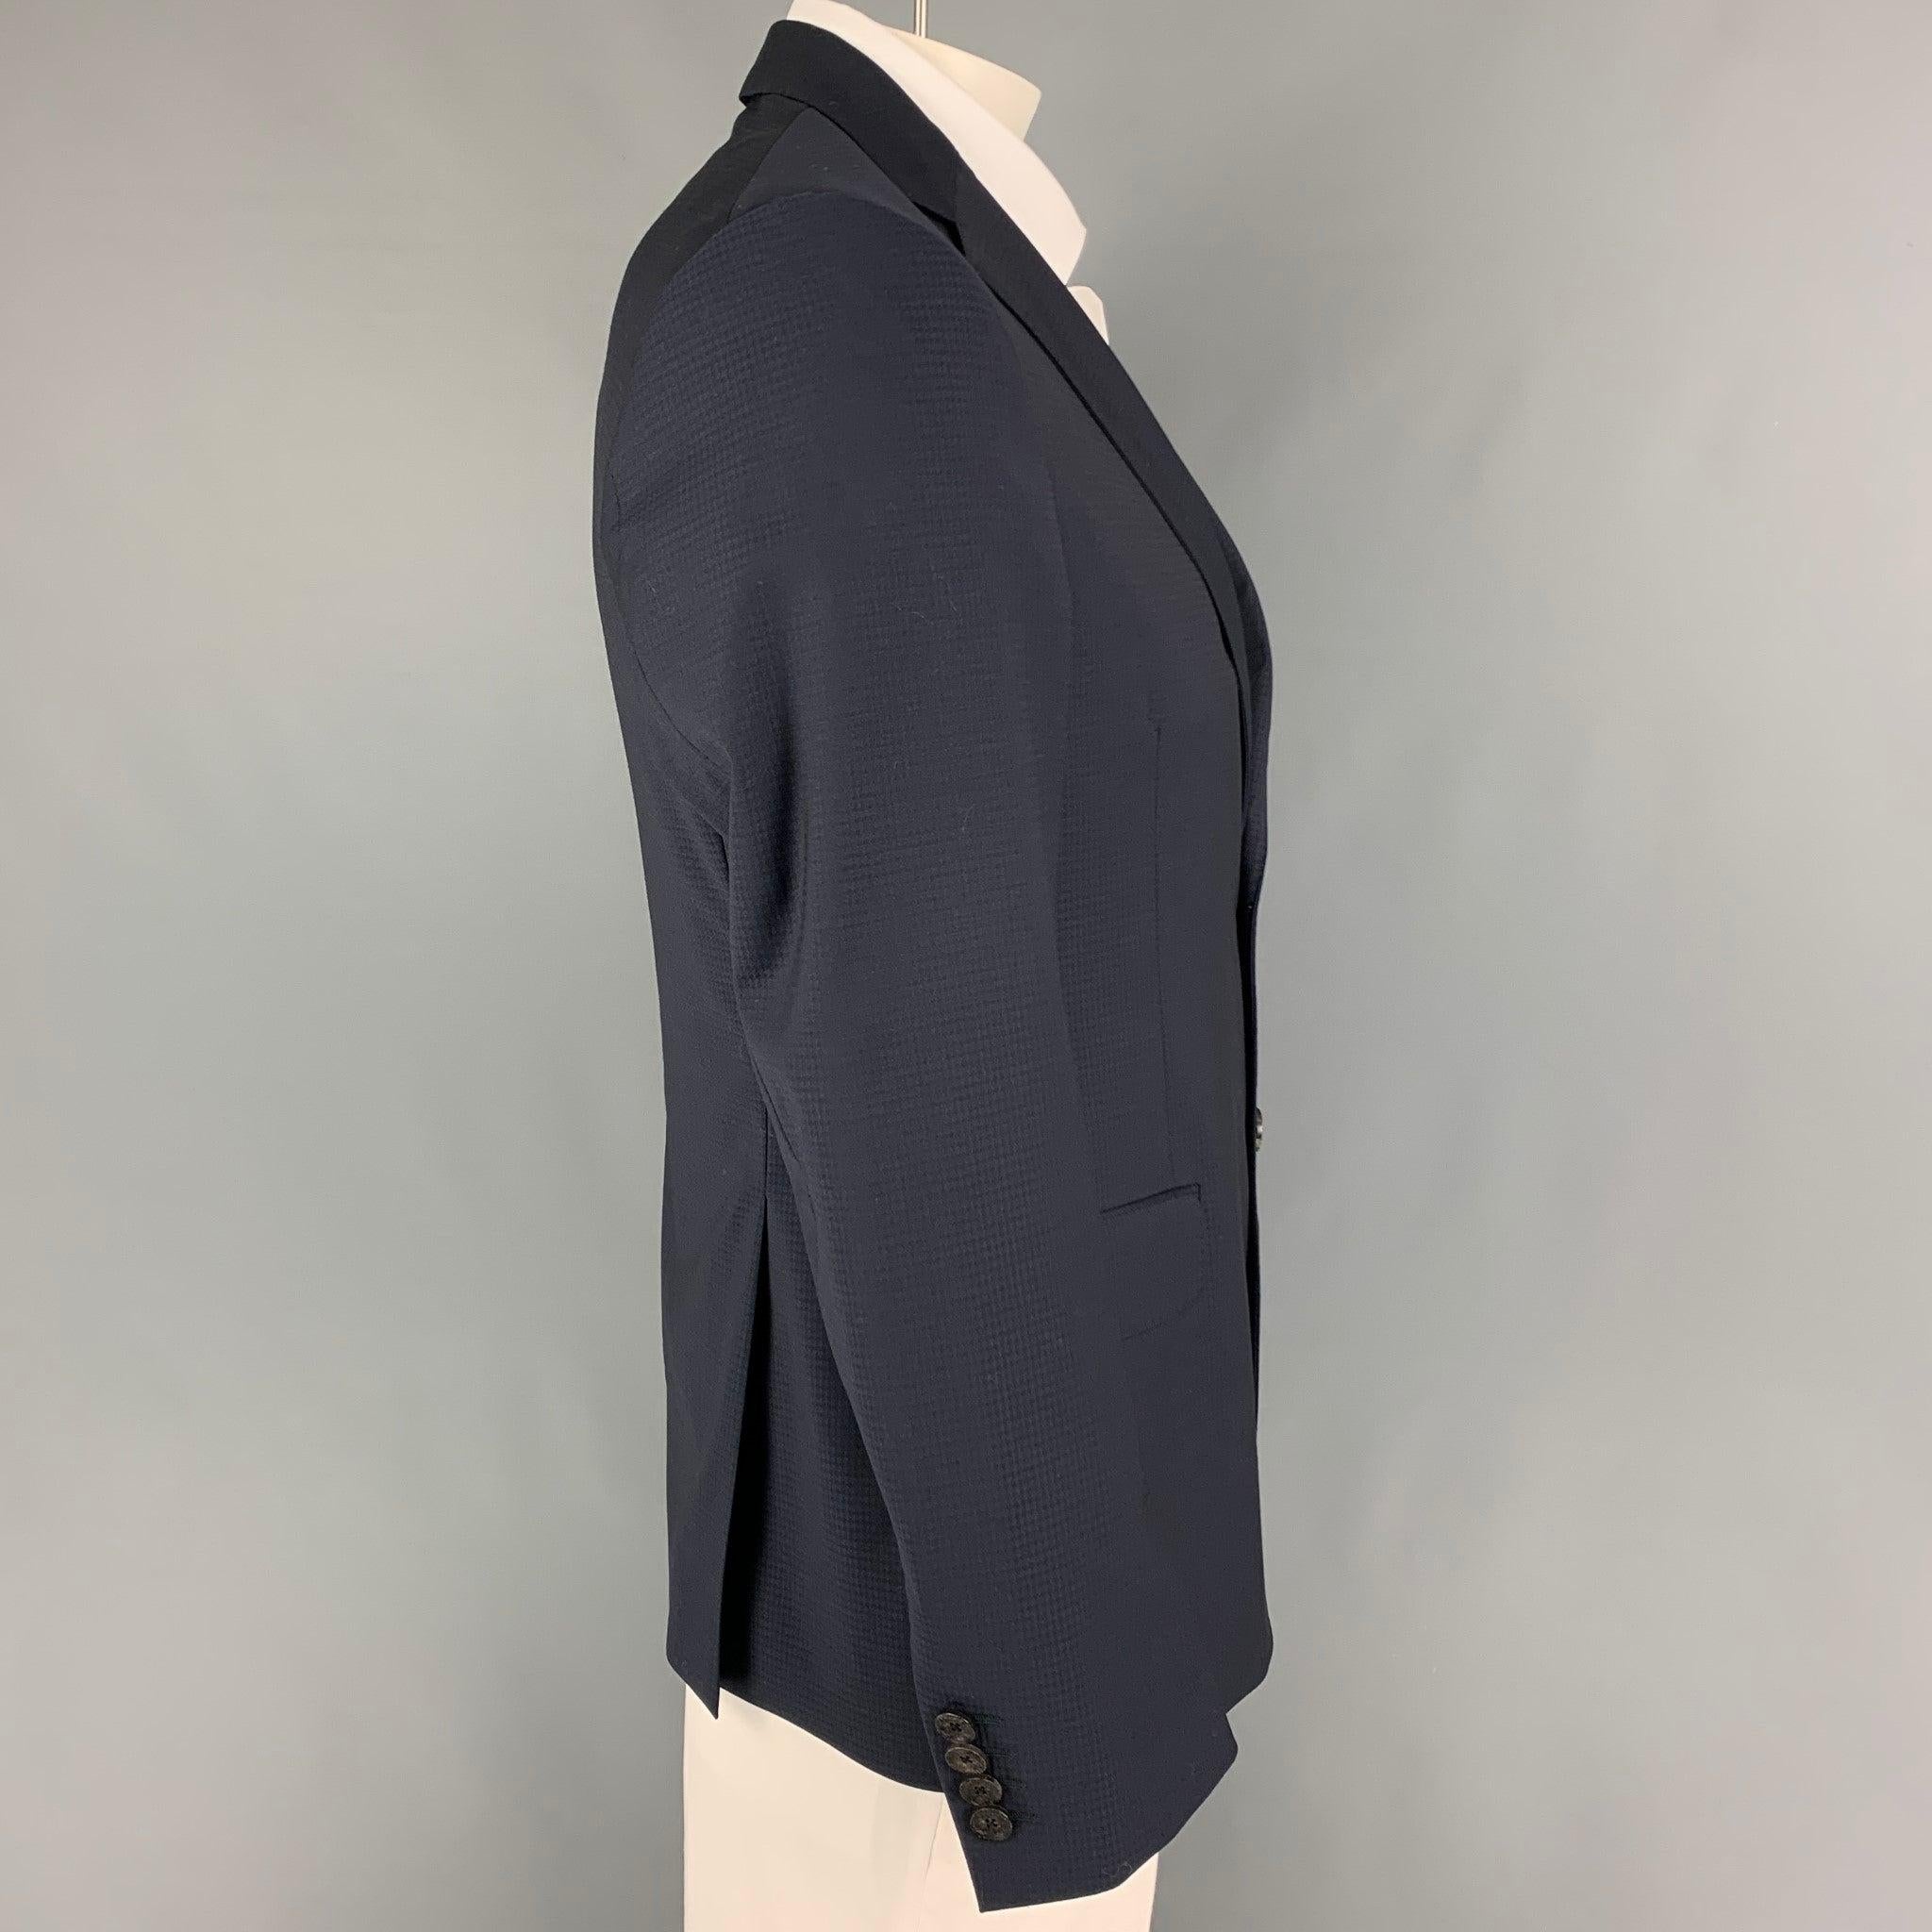 ETRO sport coat comes in a navy checkered wool with a full liner featuring a notch lapel, flap pockets, double back vent, and a double button closure. Made in Italy.Very Good Pre-Owned Condition. 

Marked:   52 

Measurements: 
 
Shoulder: 17.5